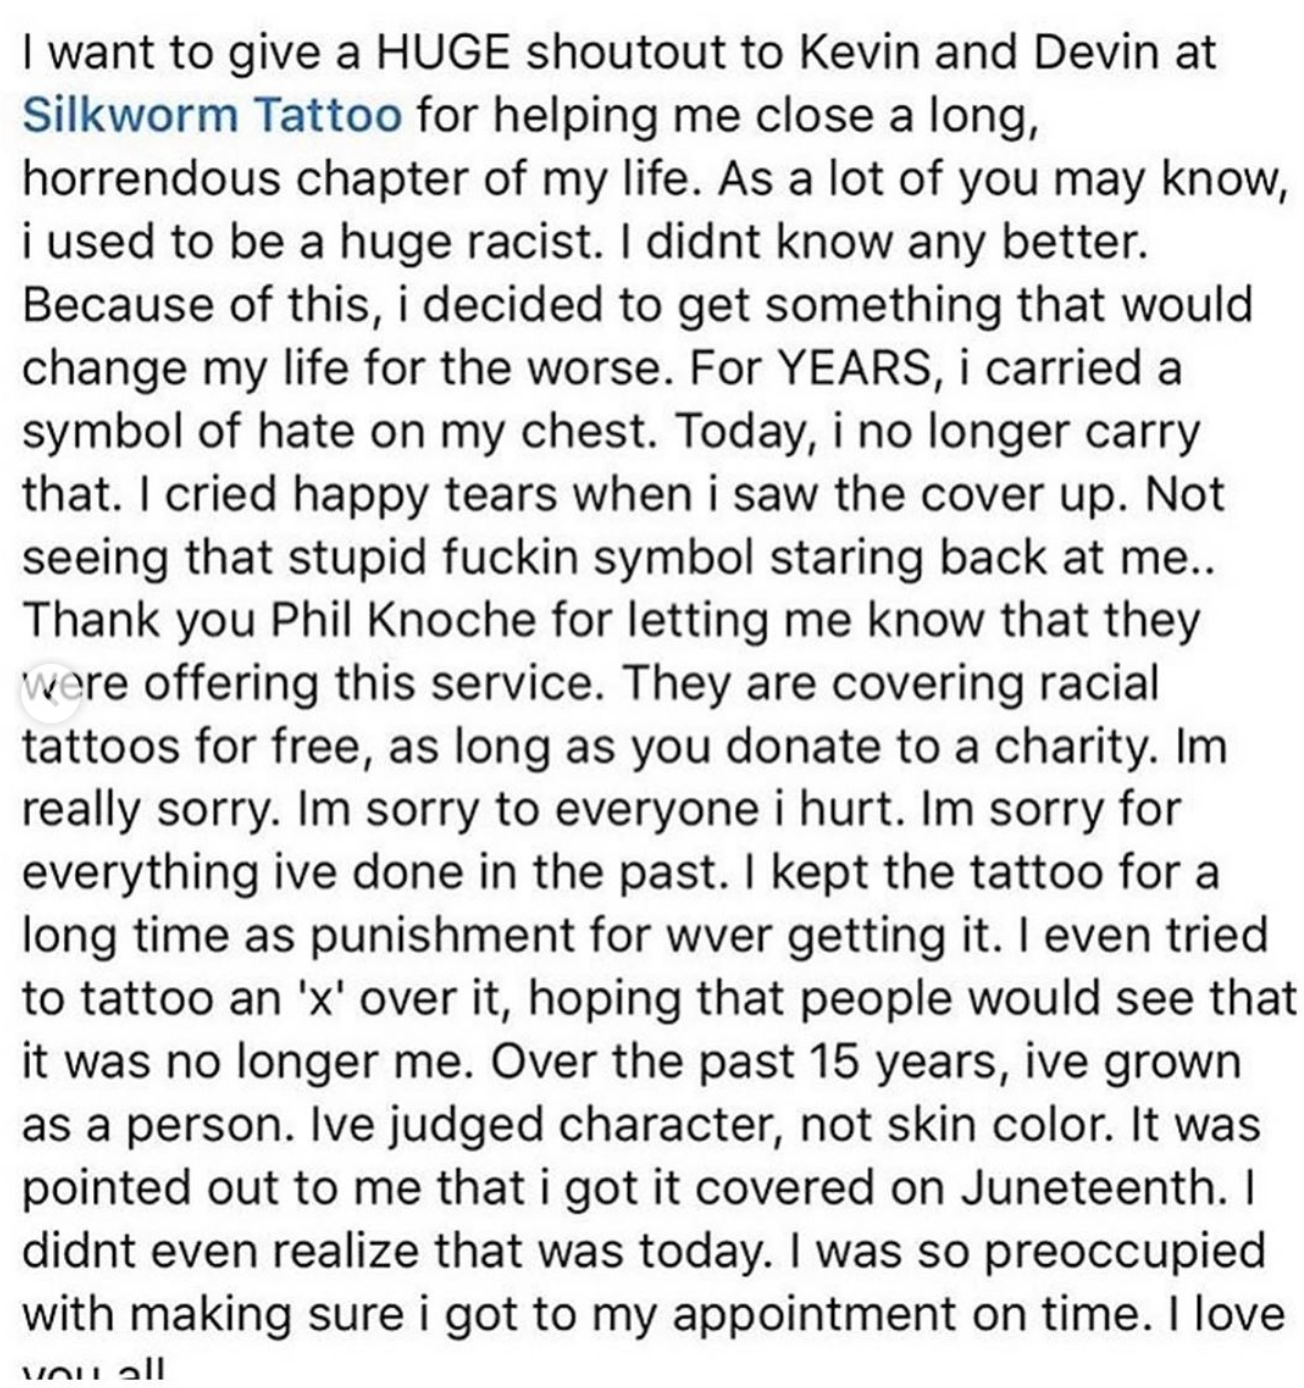 infj misunderstood - I want to give a Huge shoutout to Kevin and Devin at Silkworm Tattoo for helping me close a long, horrendous chapter of my life. As a lot of you may know, i used to be a huge racist. I didnt know any better. Because of this, i decided